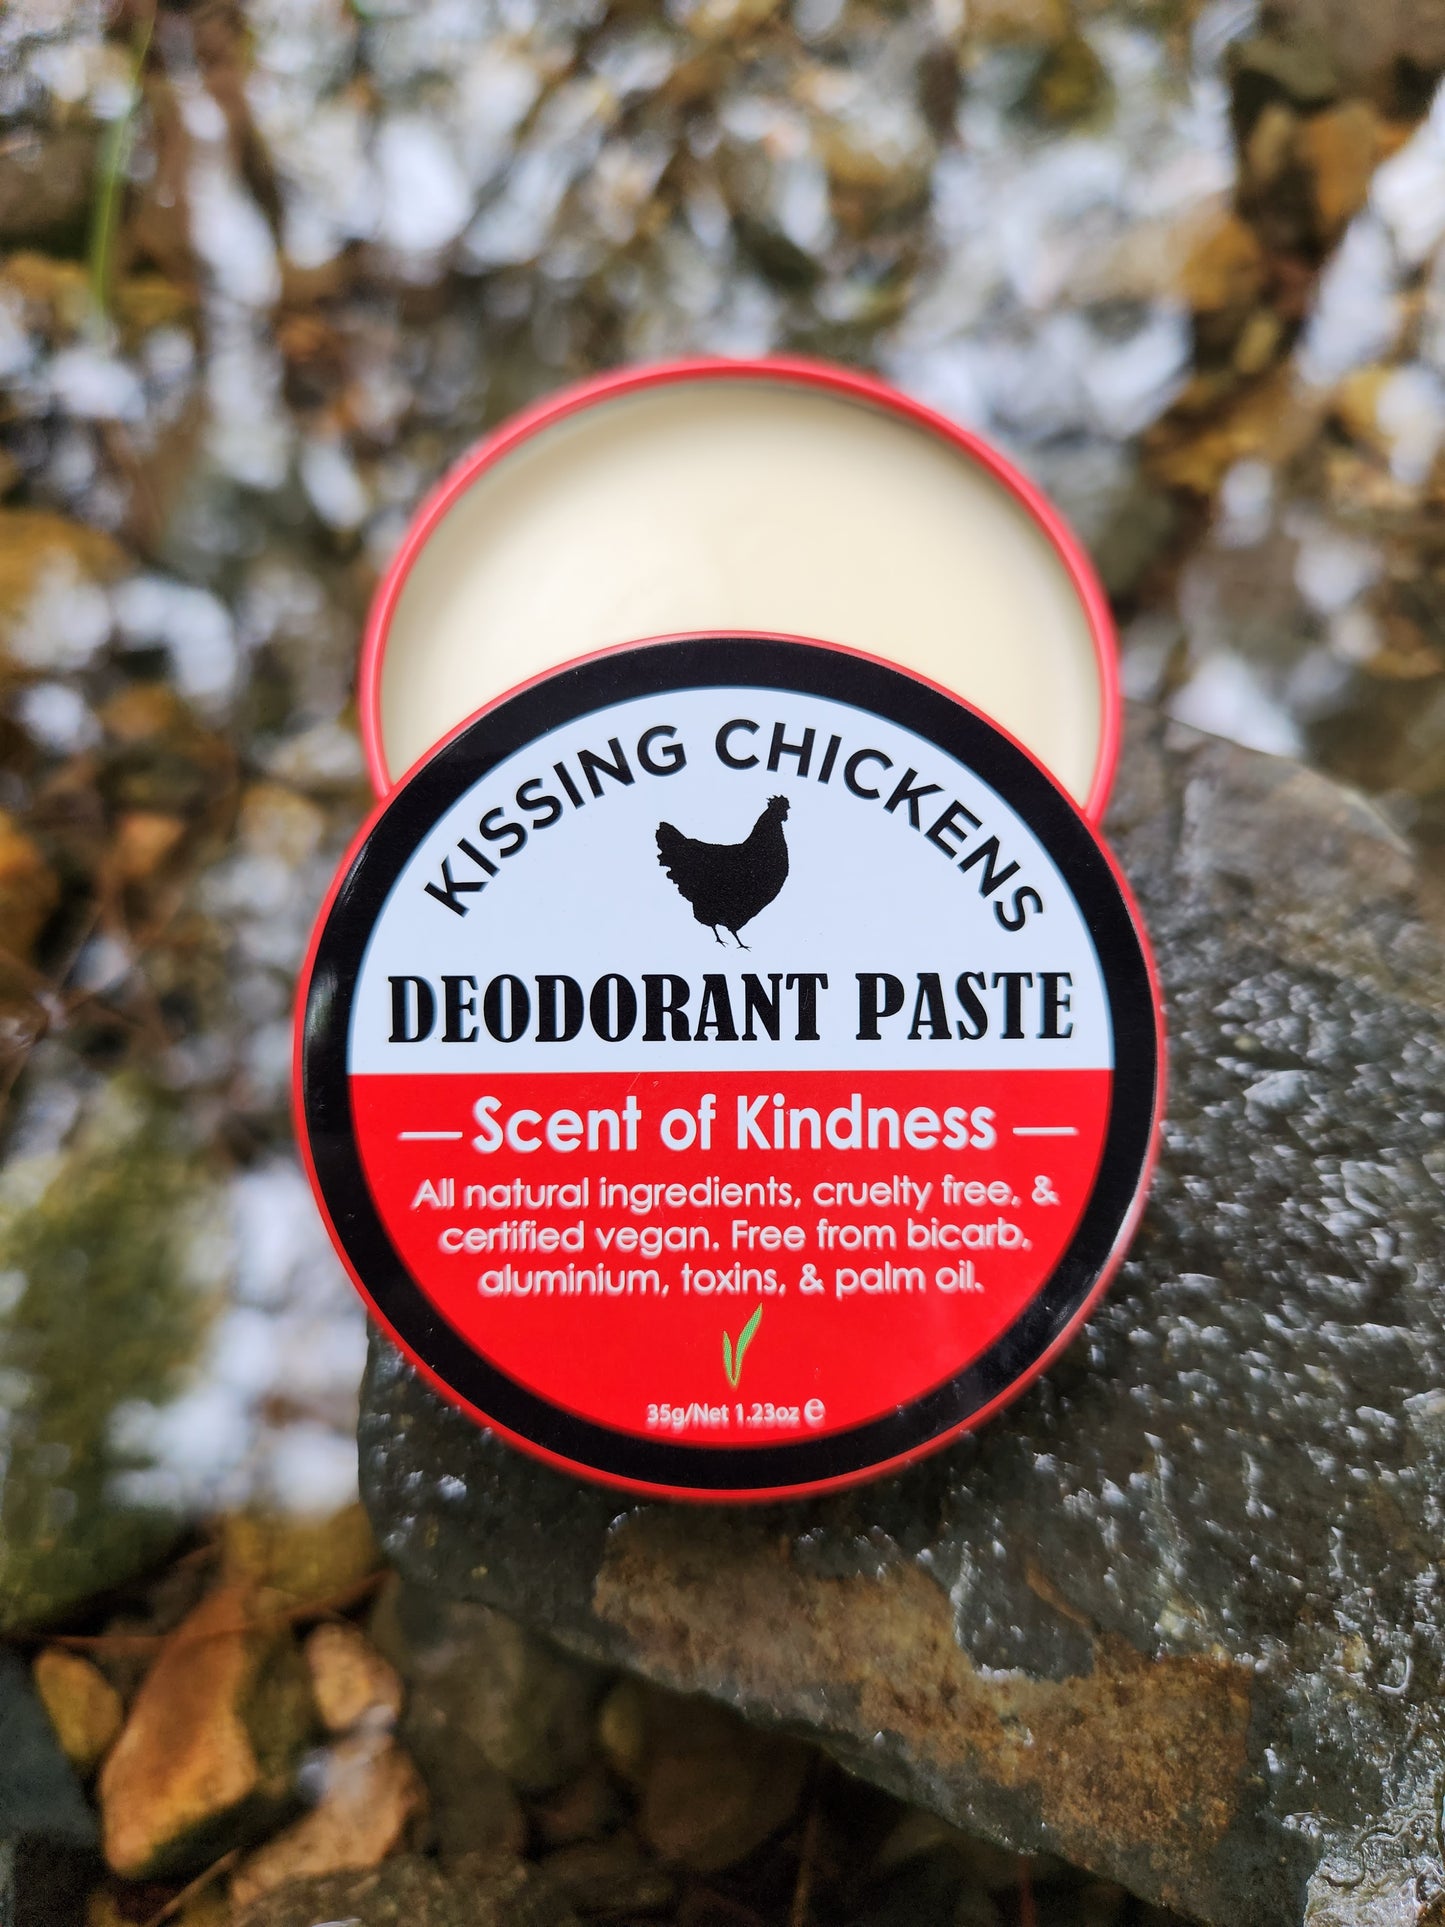 Kissing Chickens Bicarb-Free Natural Deodorant Paste - Scent of Kindness 35g tin